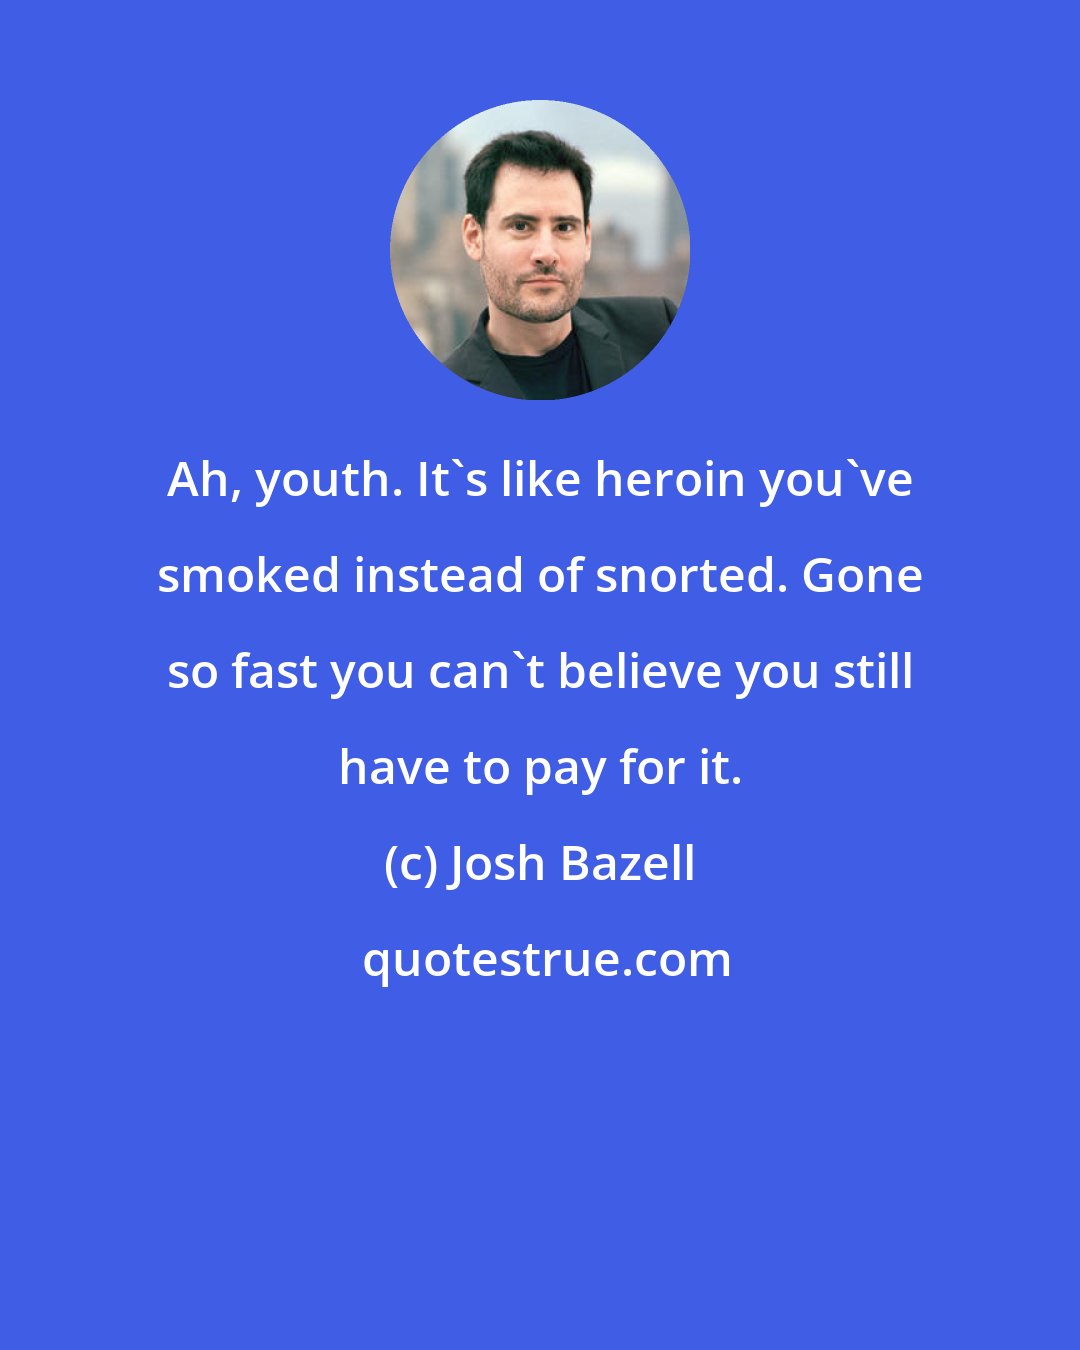 Josh Bazell: Ah, youth. It's like heroin you've smoked instead of snorted. Gone so fast you can't believe you still have to pay for it.